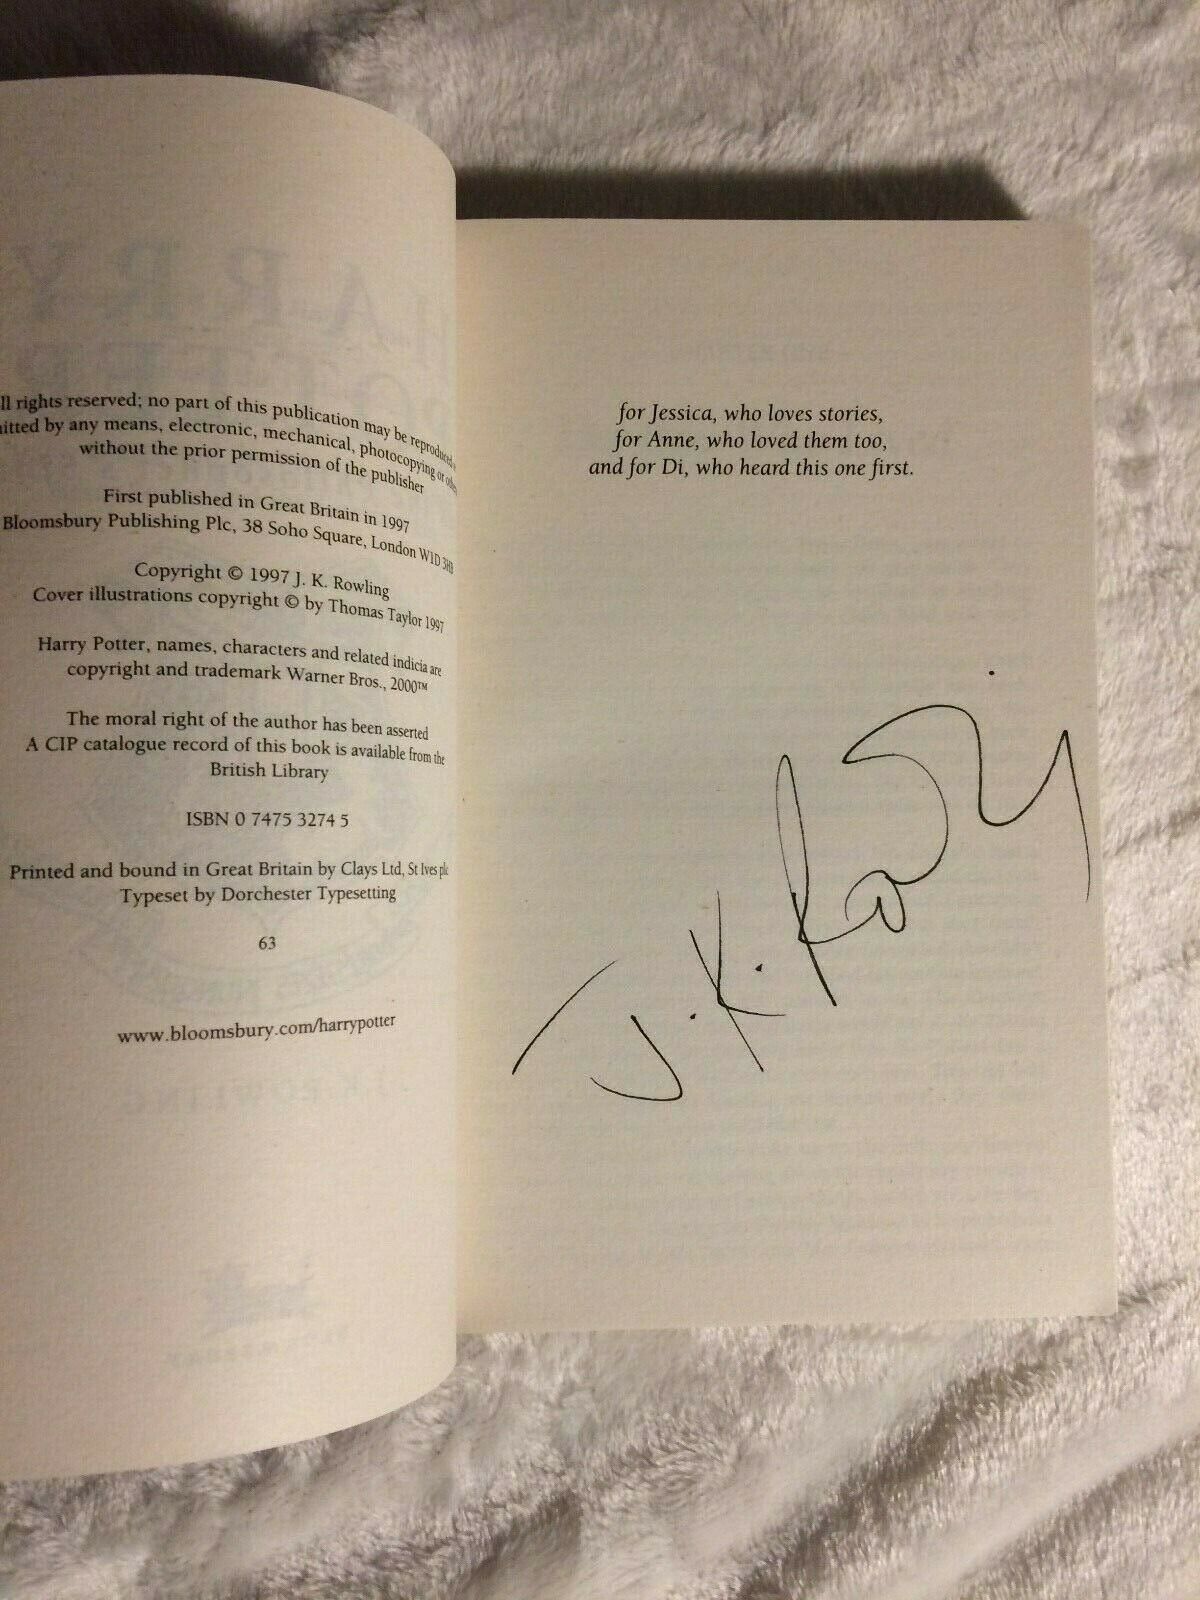 J.K. Rowling Signature Forgery found inside a Harry Potter and the Philosopher's Stone on ebay. Sold by PlantCollections72.